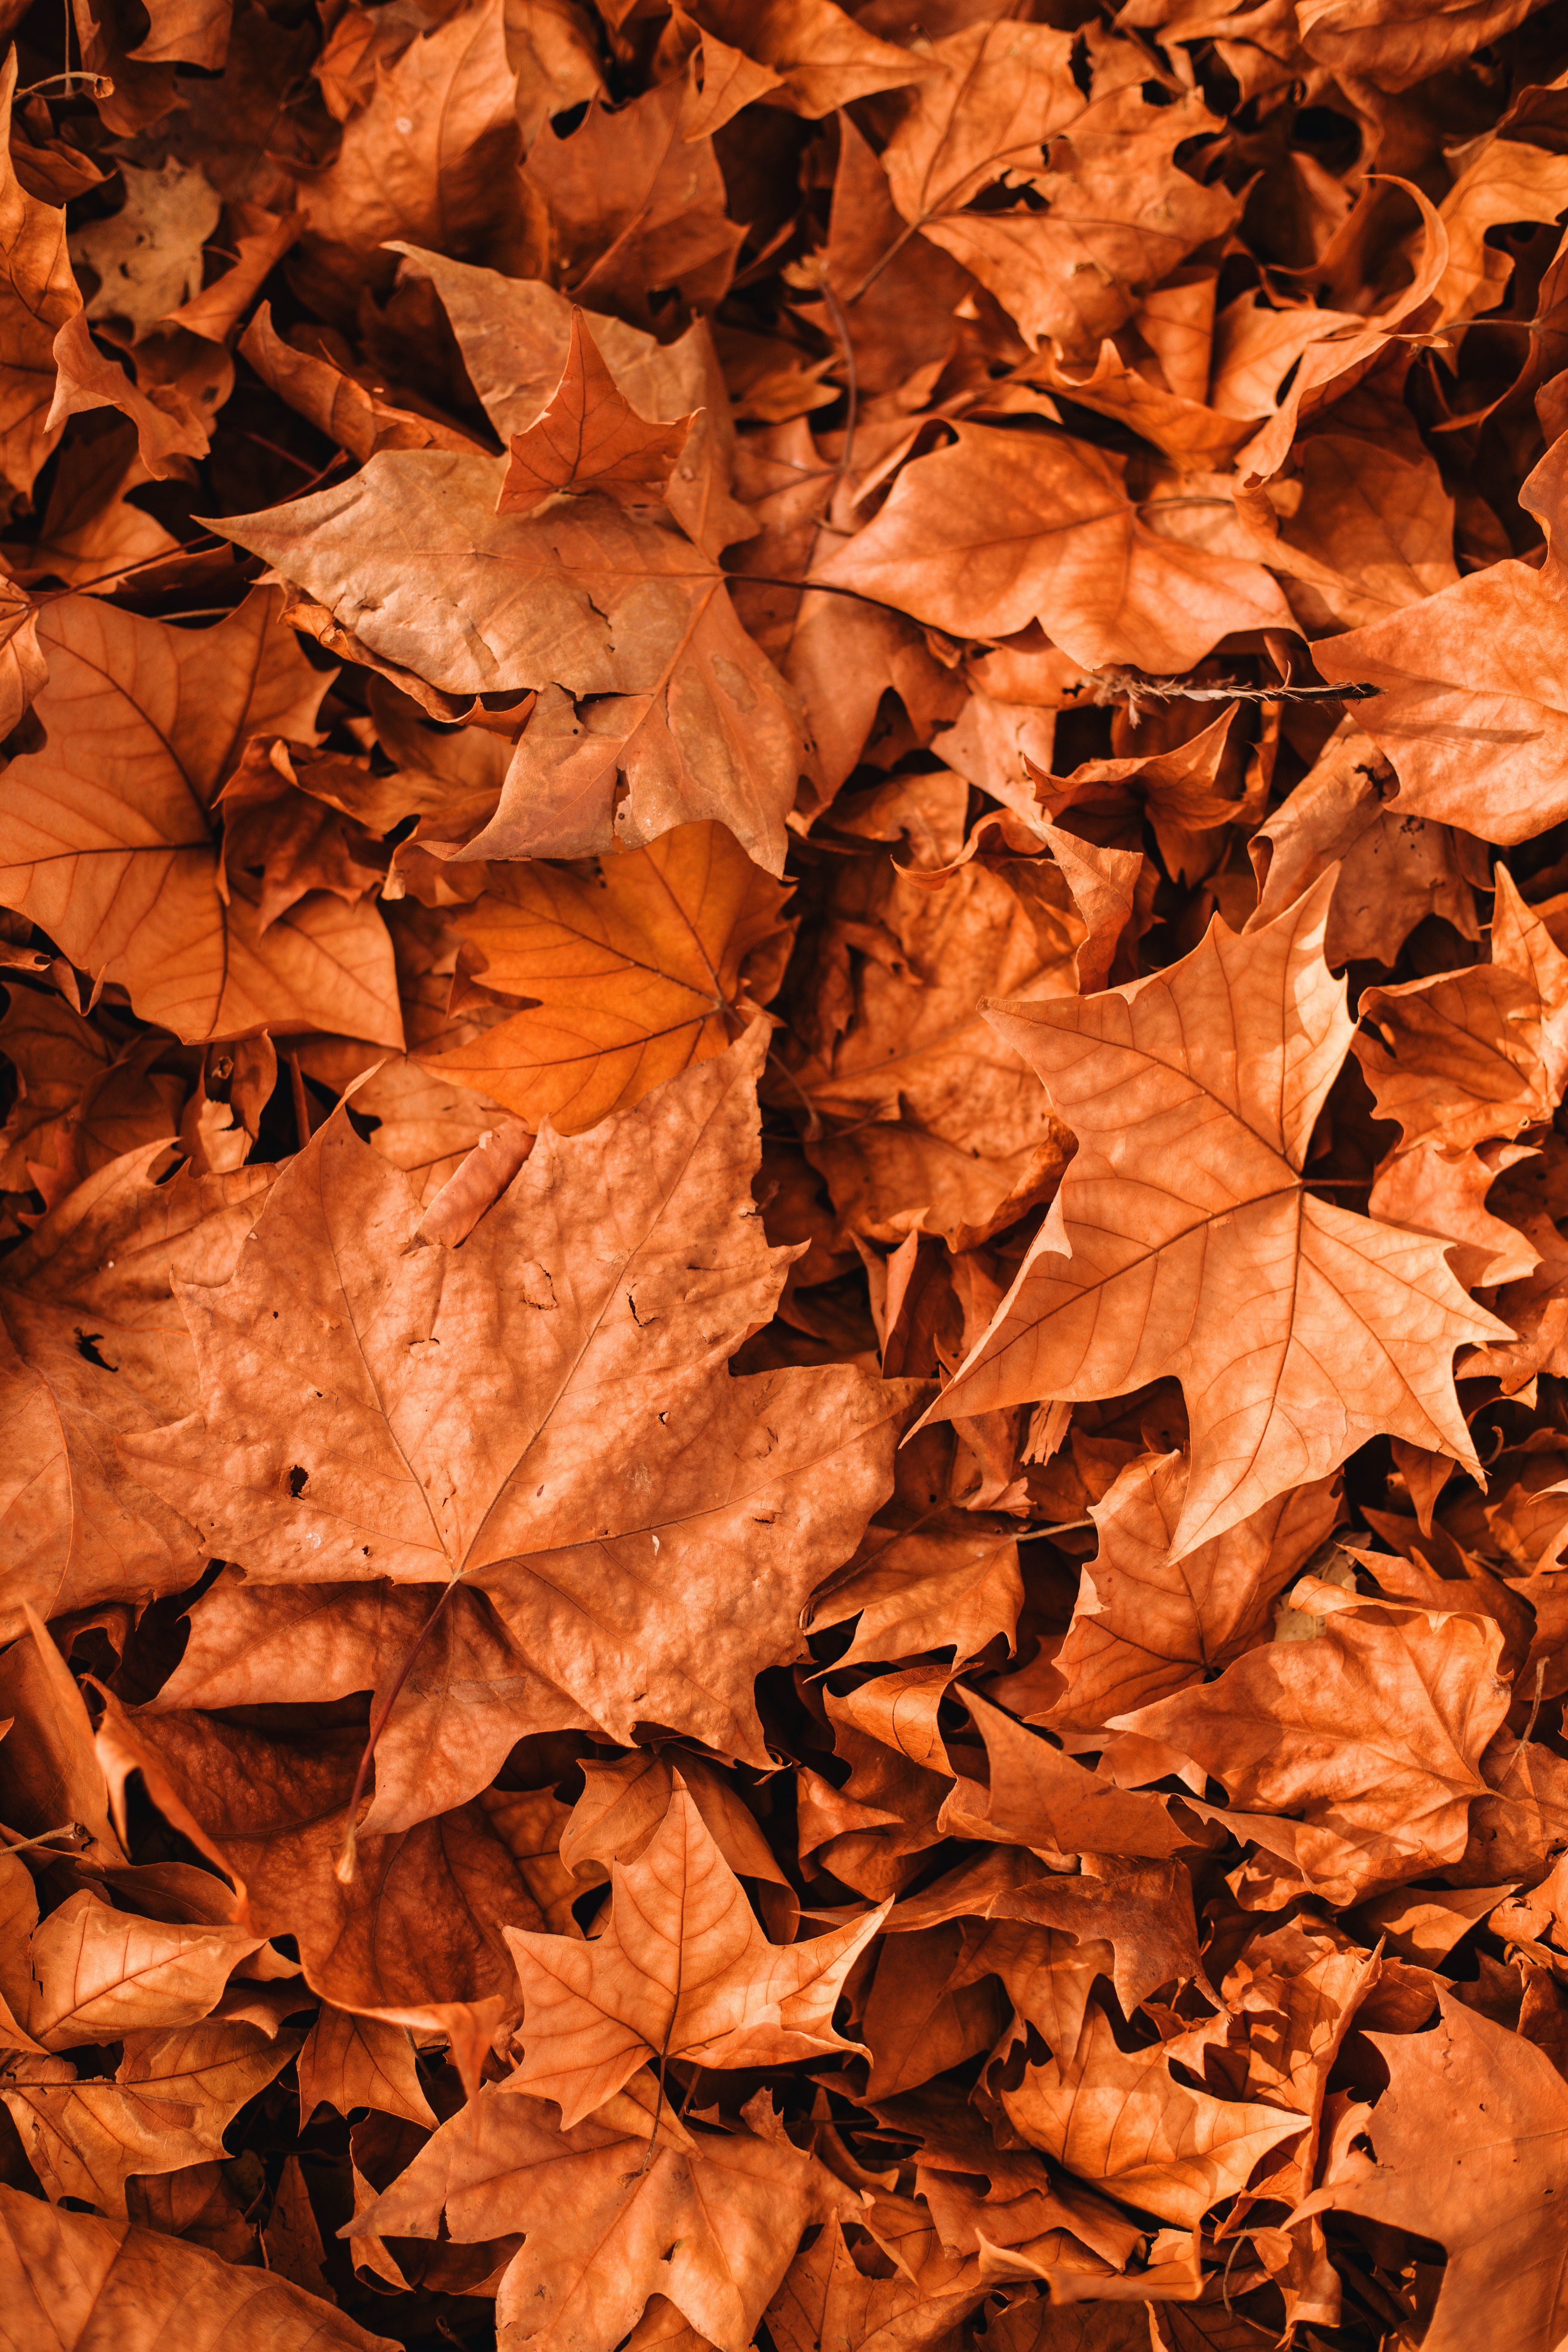 Autumn Hd Wallpapers Background, Top 100 Images On Facebook, Desktop  Picture Fall, Background Desktop Background Image And Wallpaper for Free  Download